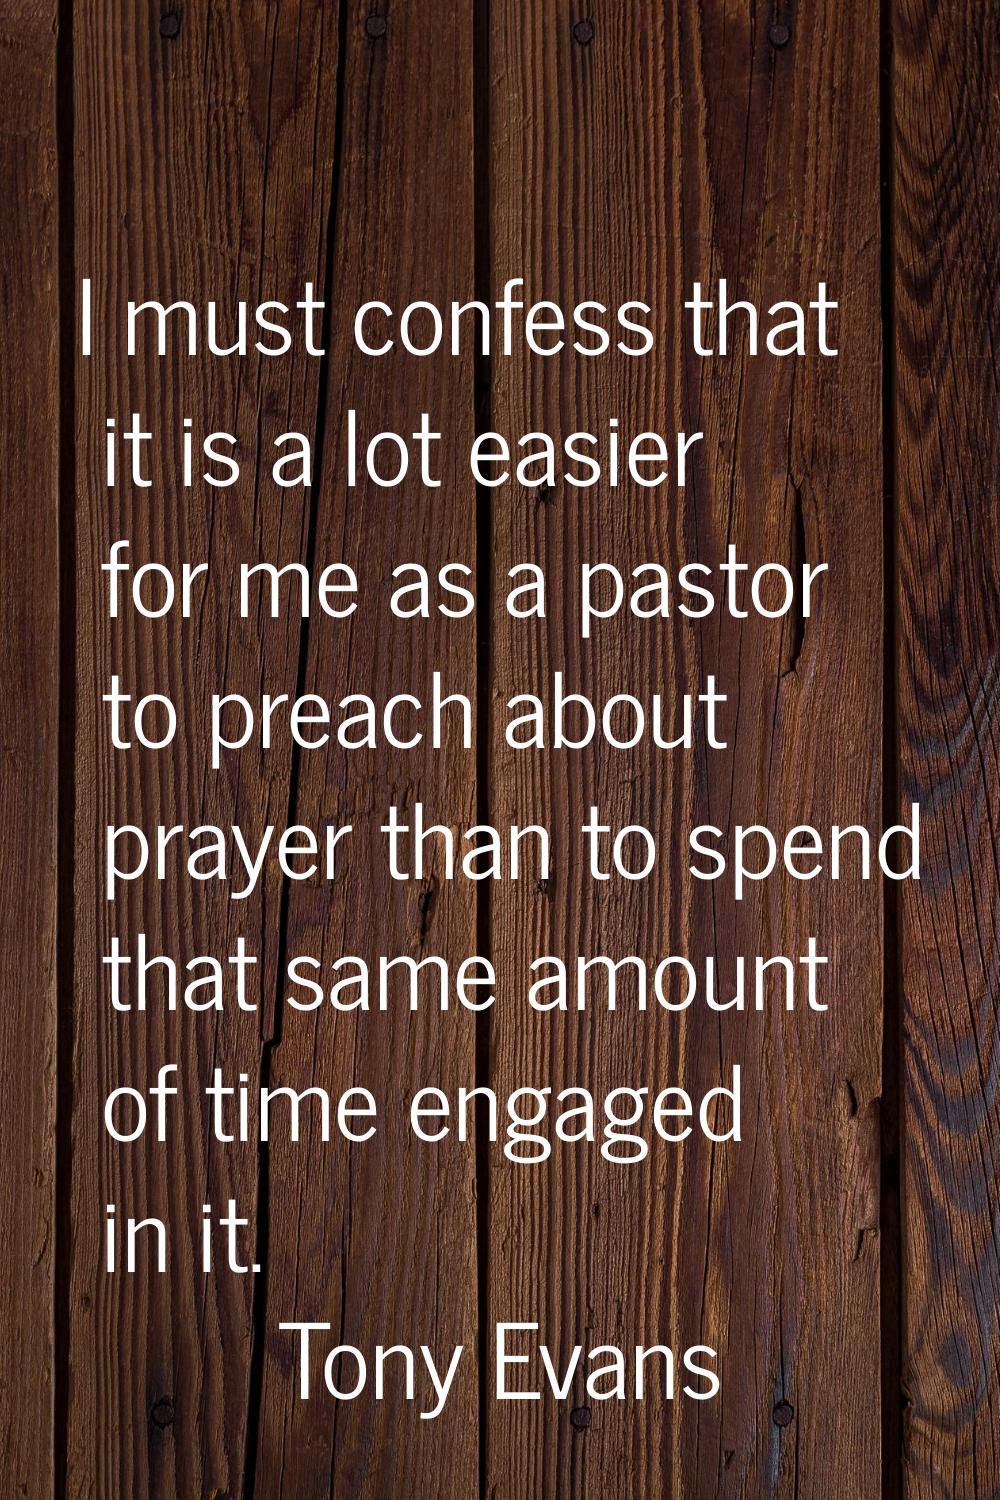 I must confess that it is a lot easier for me as a pastor to preach about prayer than to spend that